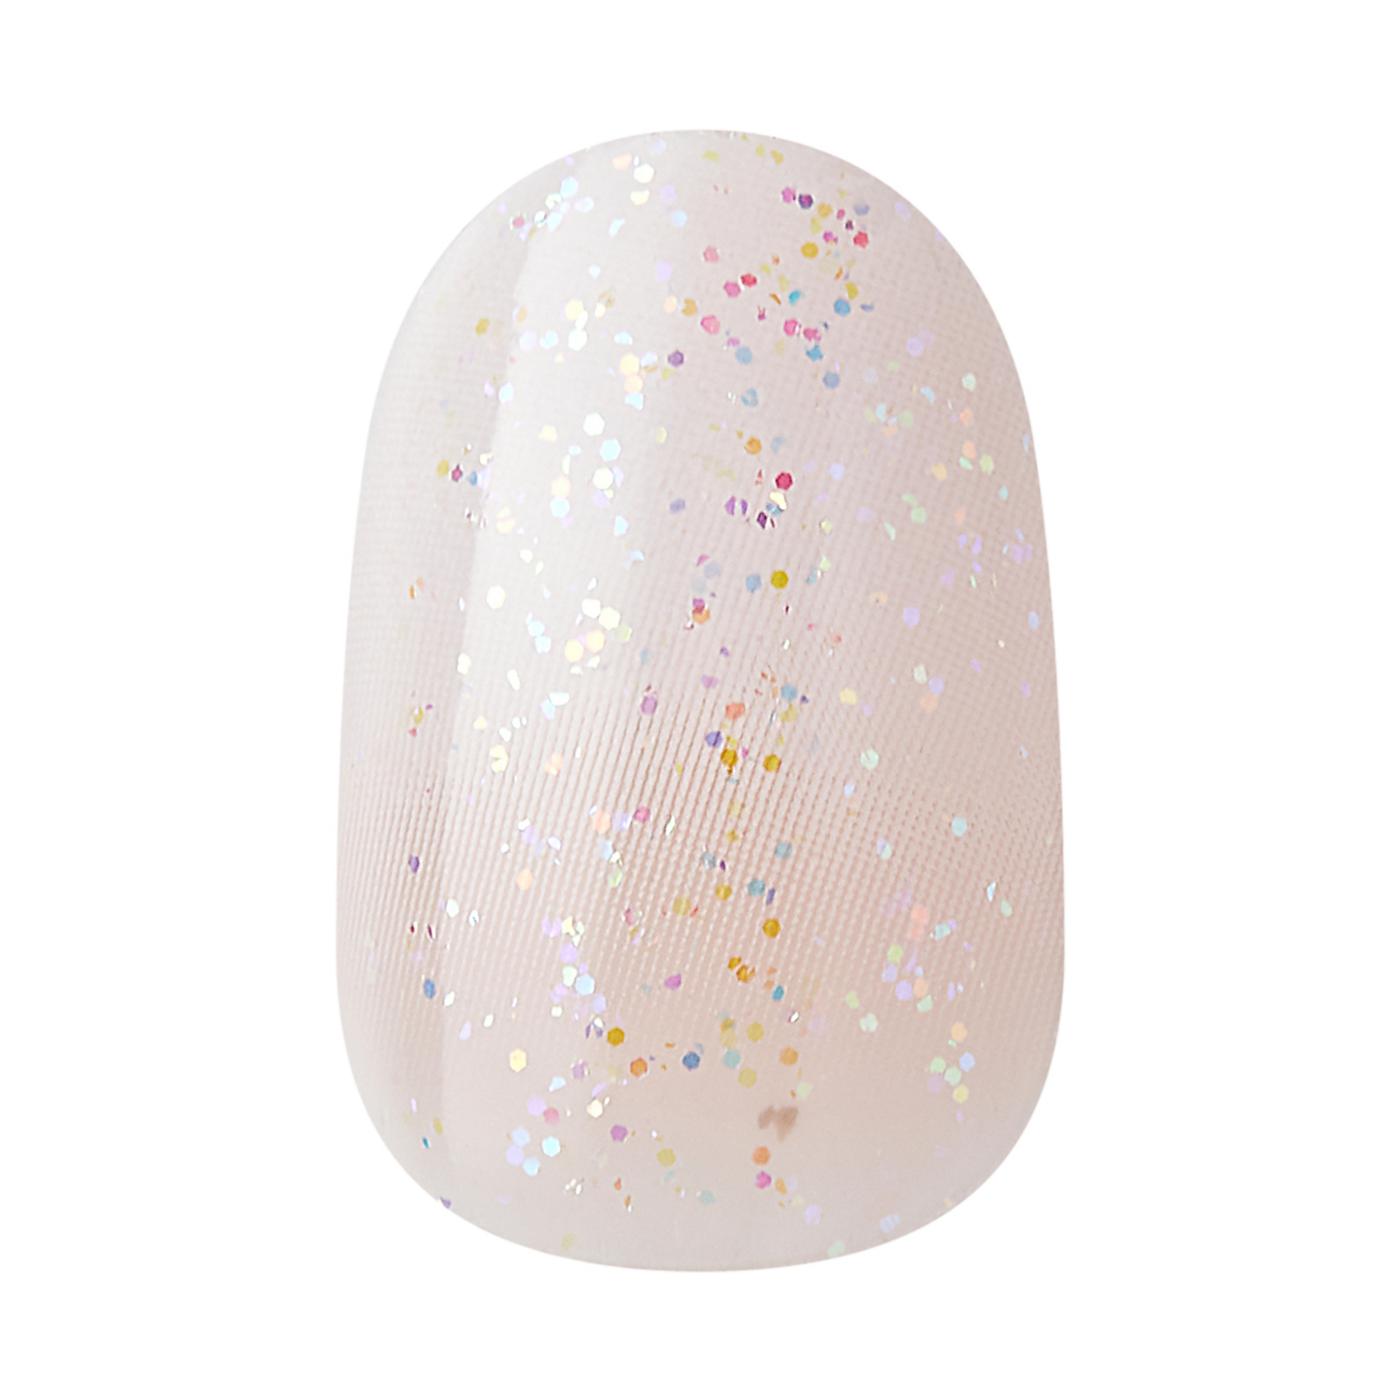 KISS Gel Fantasy Dream Dust Nails - Silver Spoon; image 3 of 6